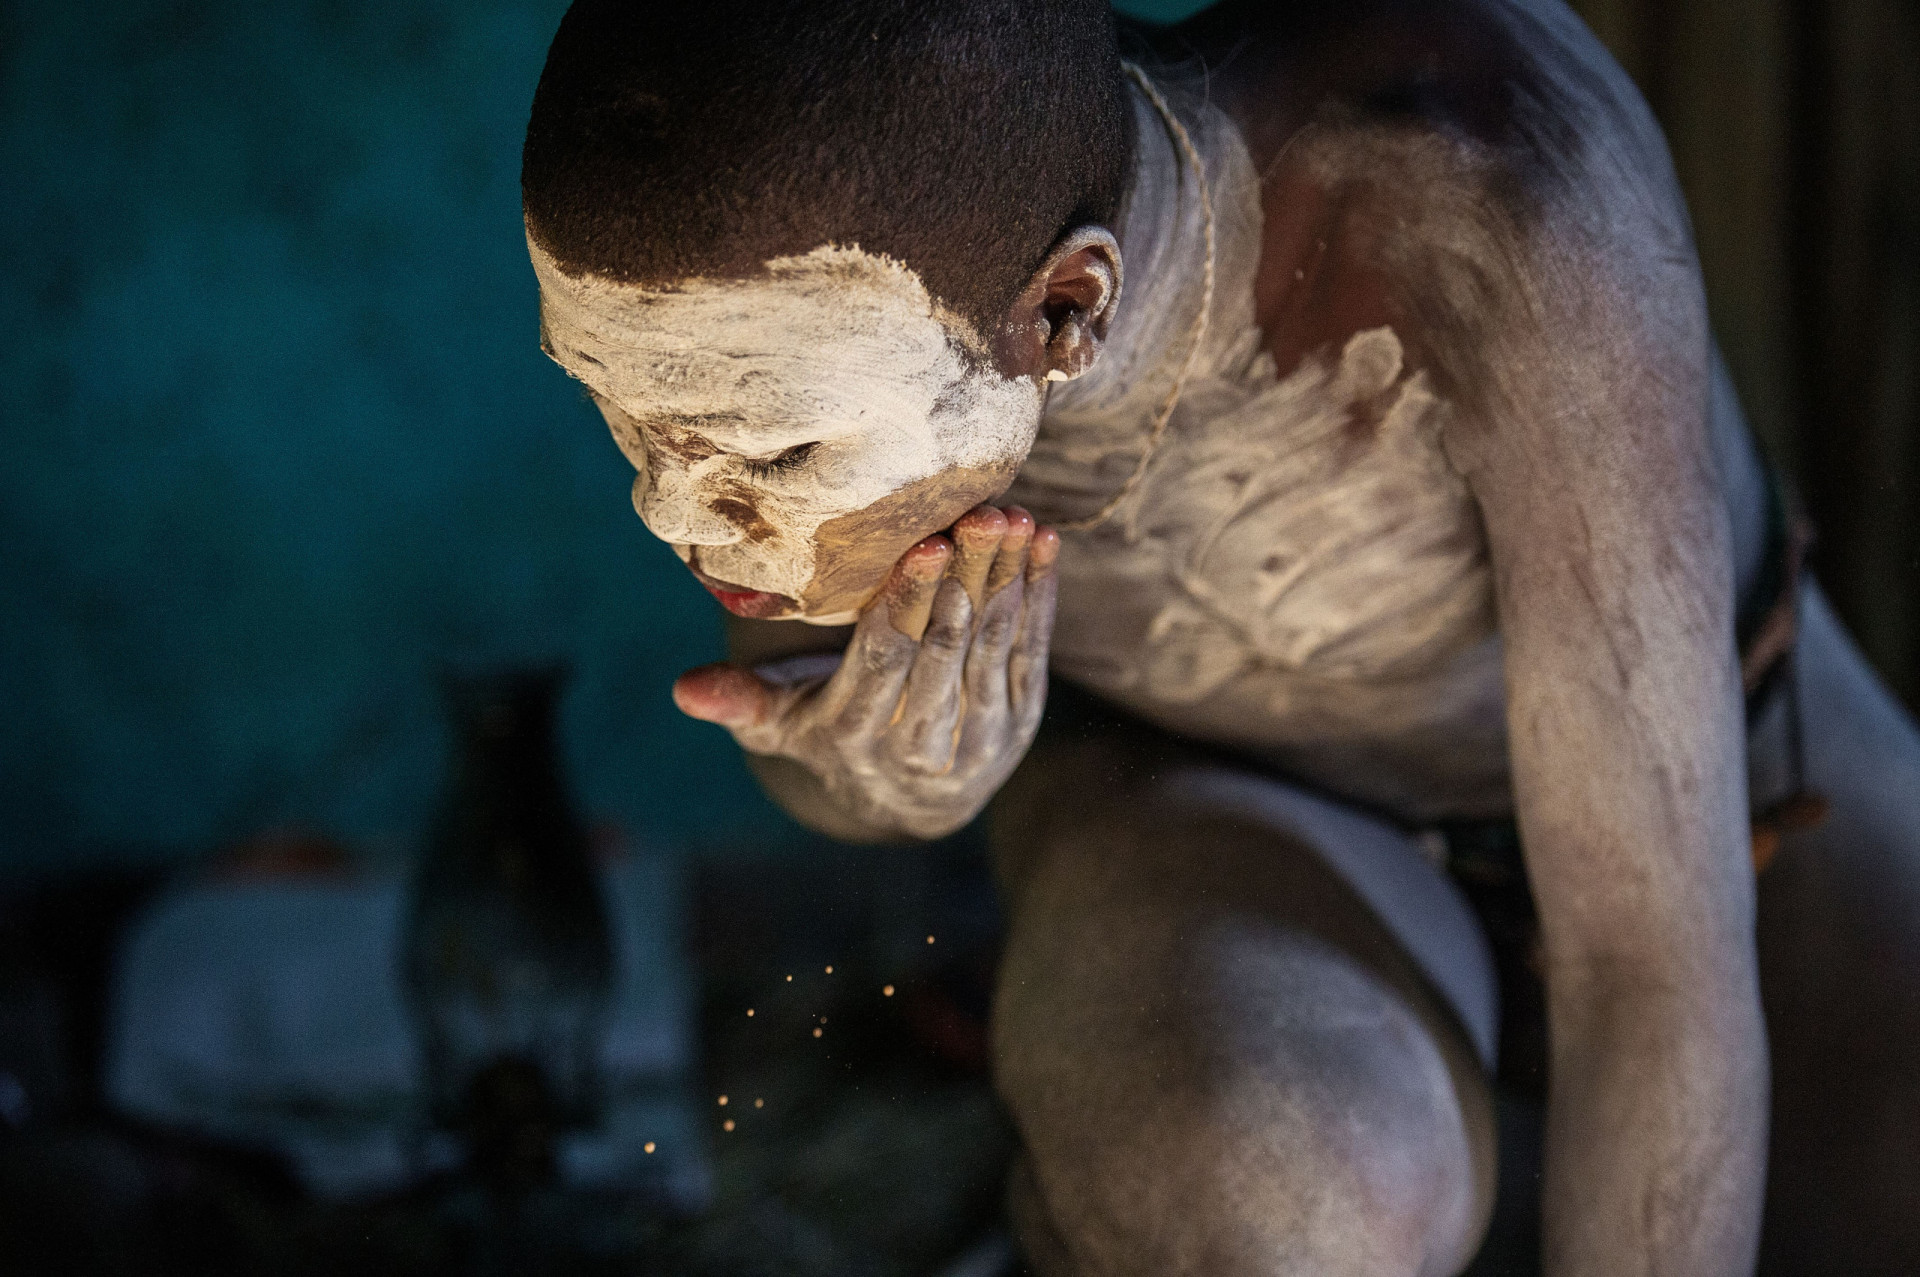 <p>The Xhosa people have a deep spiritual connection to their ancestors and the natural world. Traditional healers (<em>sangomas</em>) are known to smear white clay on bodies during the healing process.</p><p><a href="https://www.msn.com/en-us/community/channel/vid-7xx8mnucu55yw63we9va2gwr7uihbxwc68fxqp25x6tg4ftibpra?cvid=94631541bc0f4f89bfd59158d696ad7e">Follow us and access great exclusive content every day</a></p>